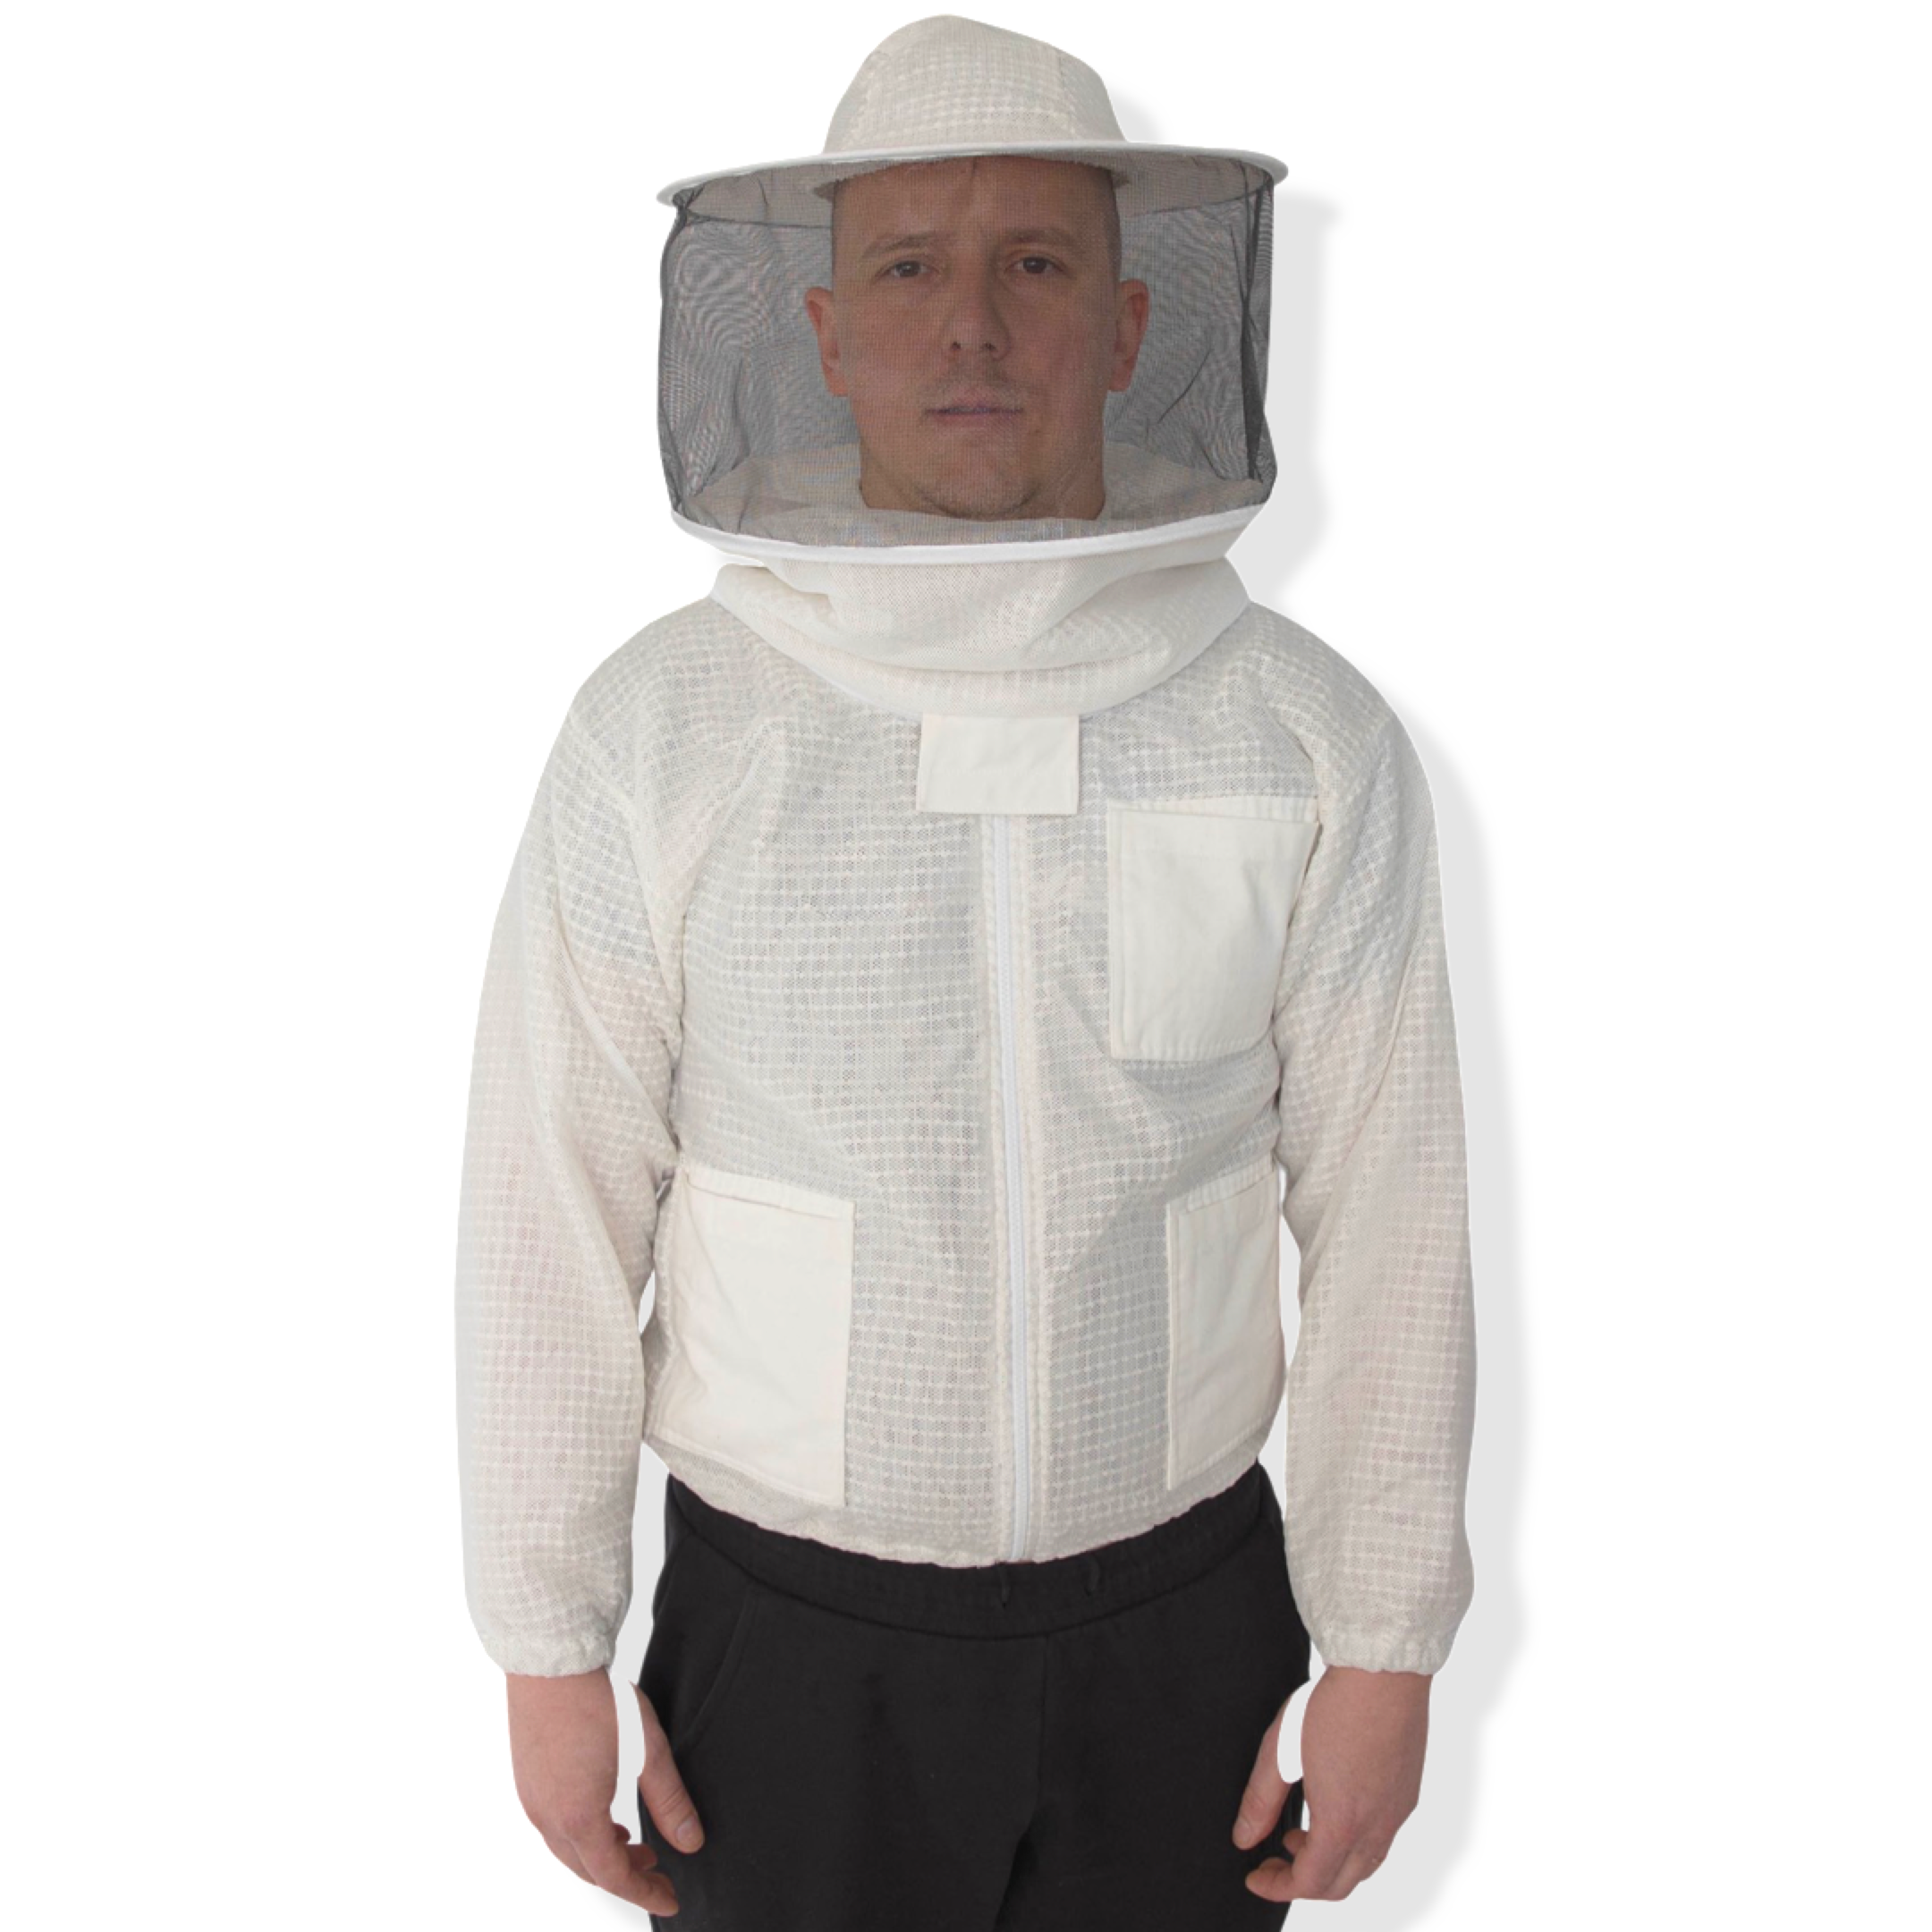 Details about   Beekeeper Ultra Ventilated 3 layer mesh 3XL Beekeeping suit Bee Hat Veil 3xl 